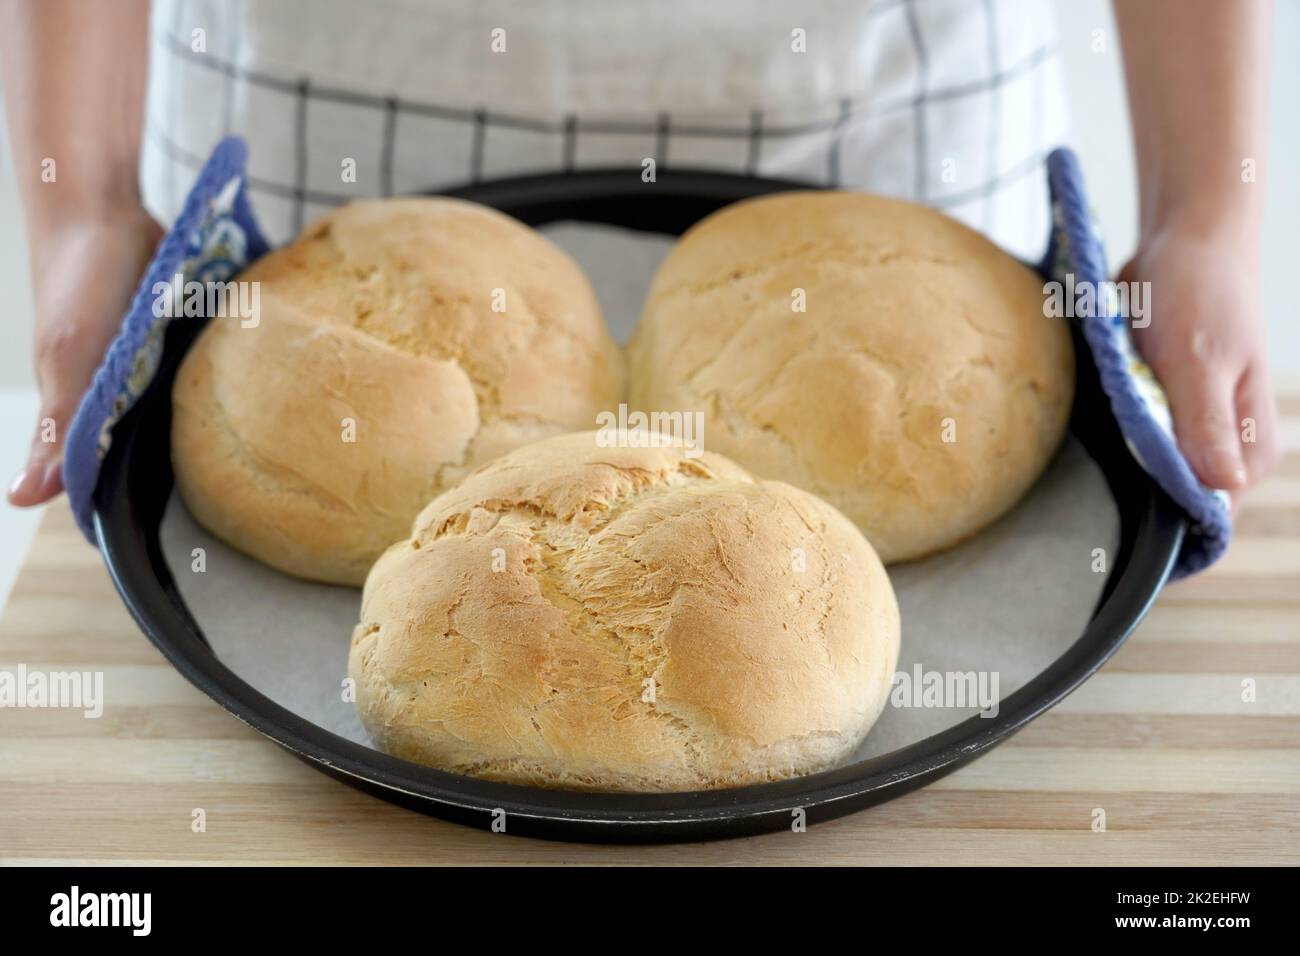 Woman showing three homemade loaves of bread in baking tray freshly baked Stock Photo